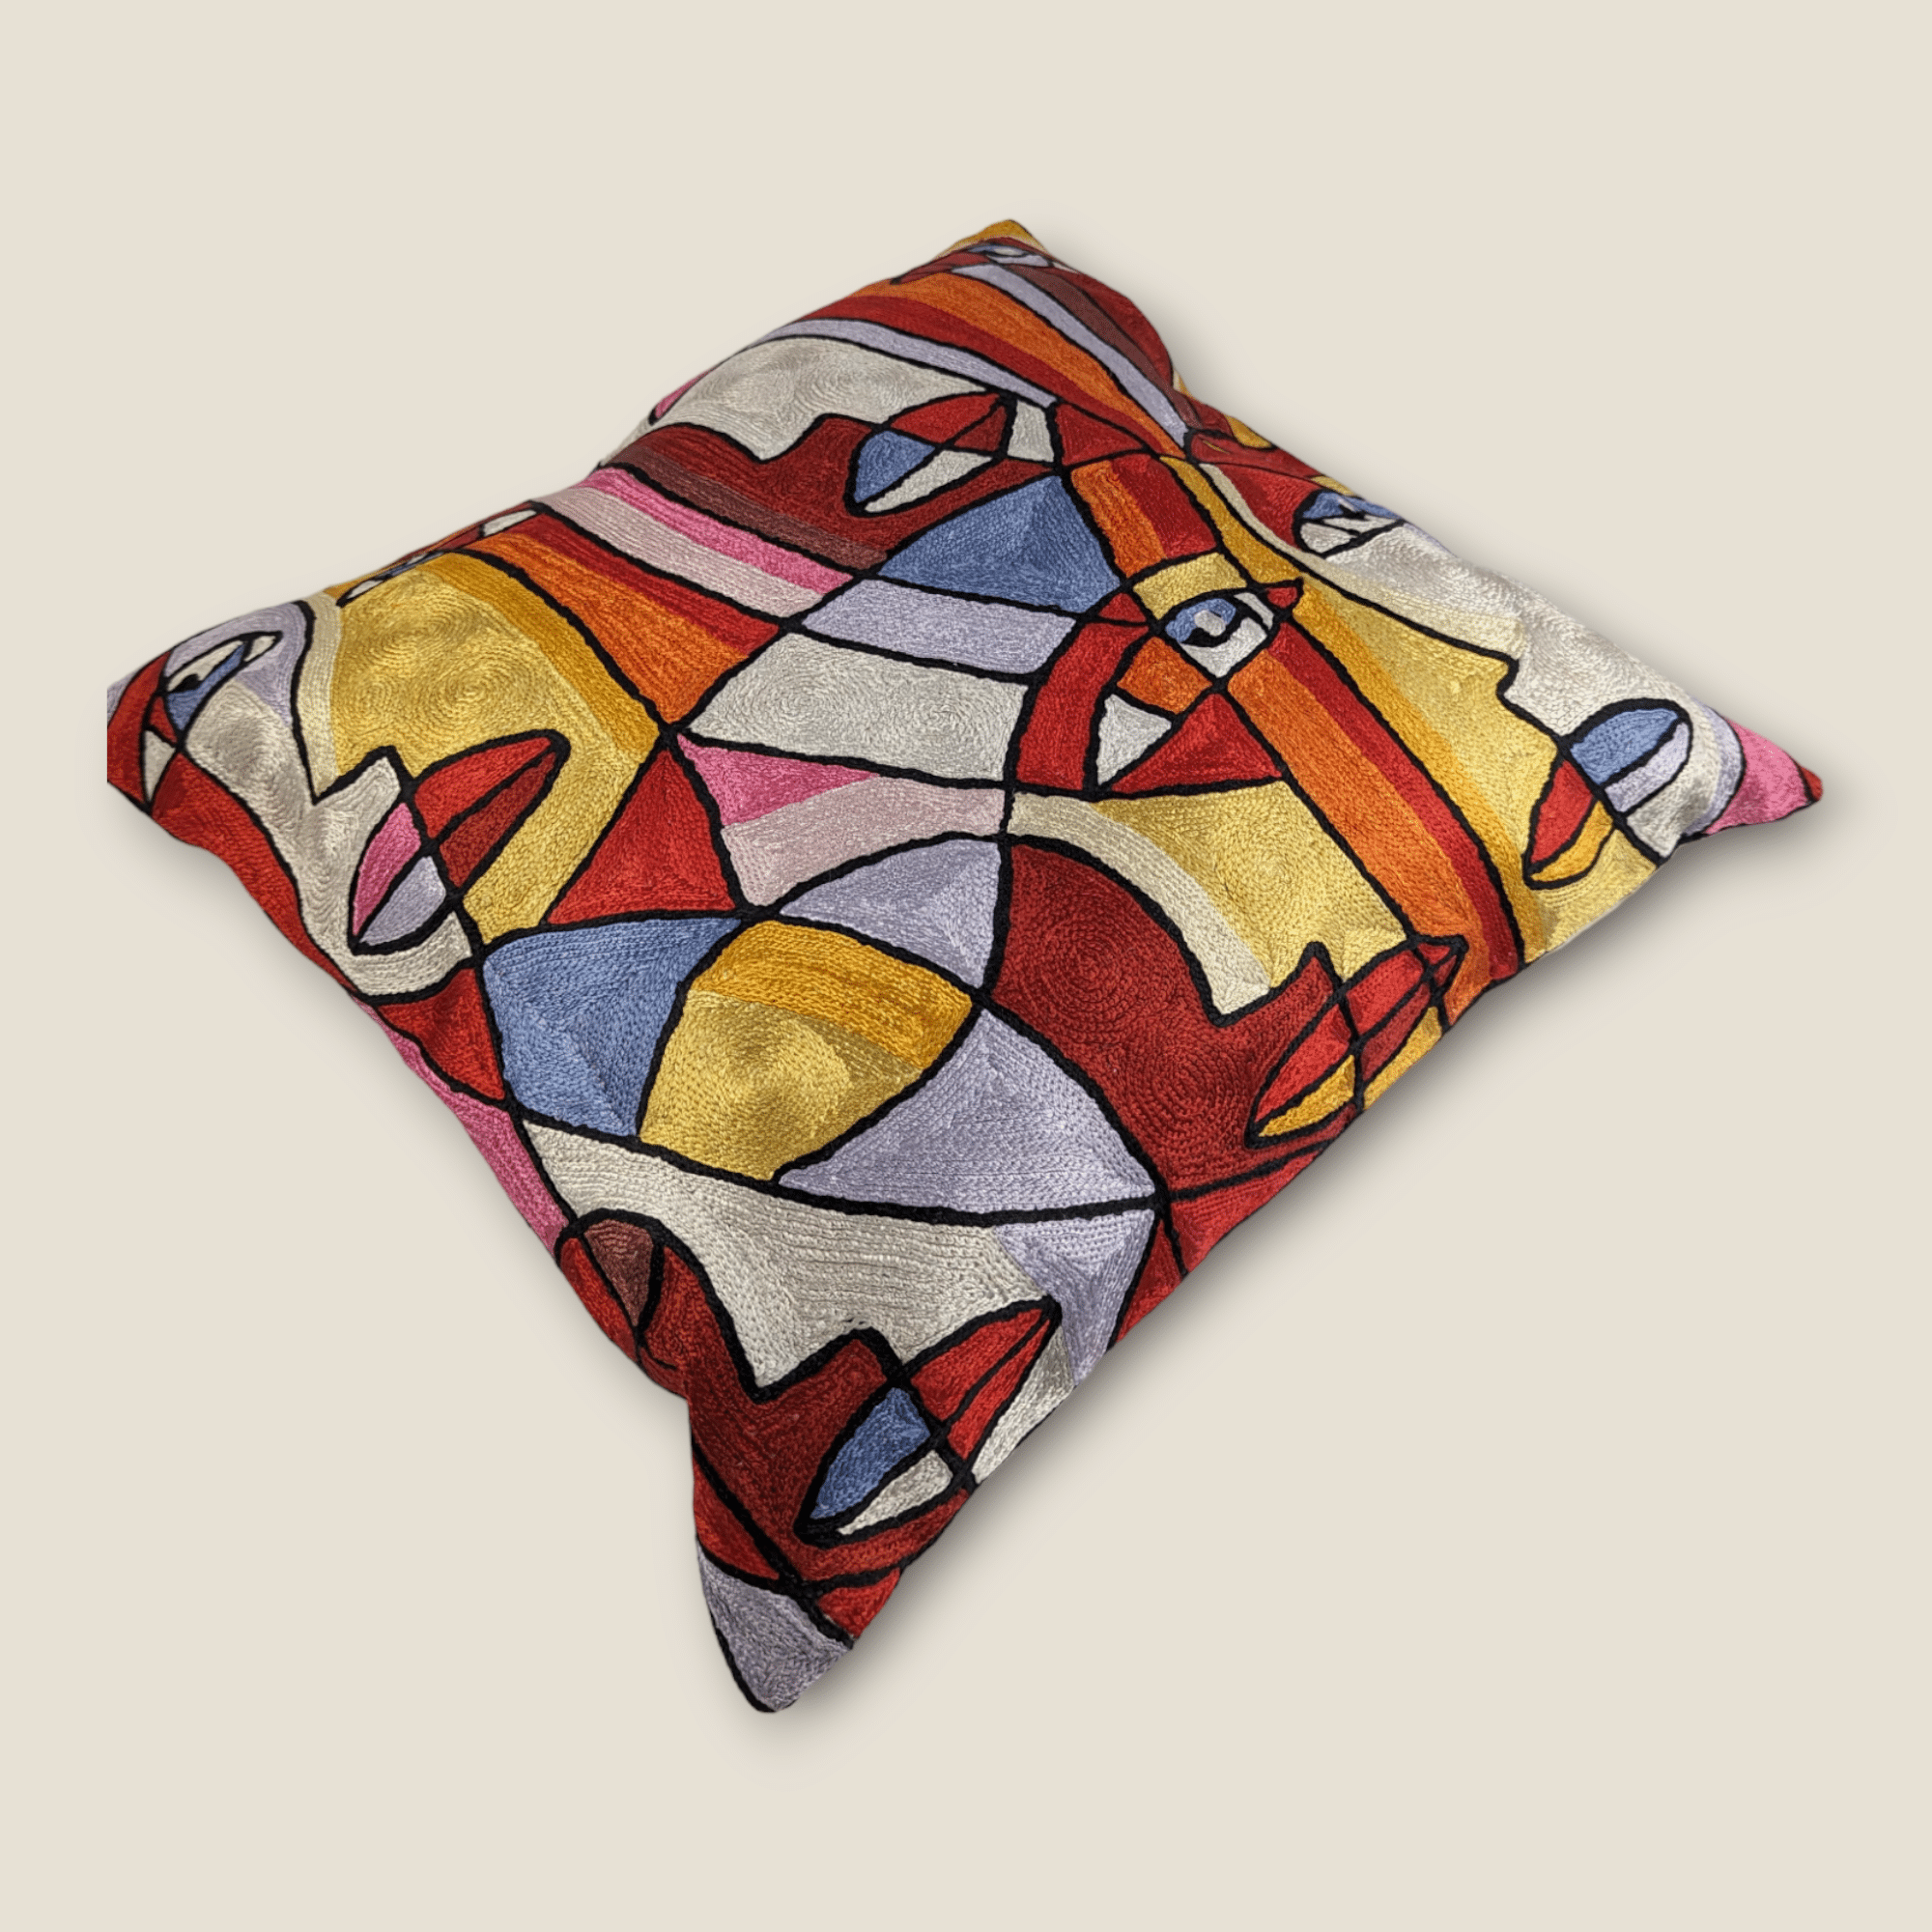 Hand Embroidered Silk Cushion Cover - Abstract Faces